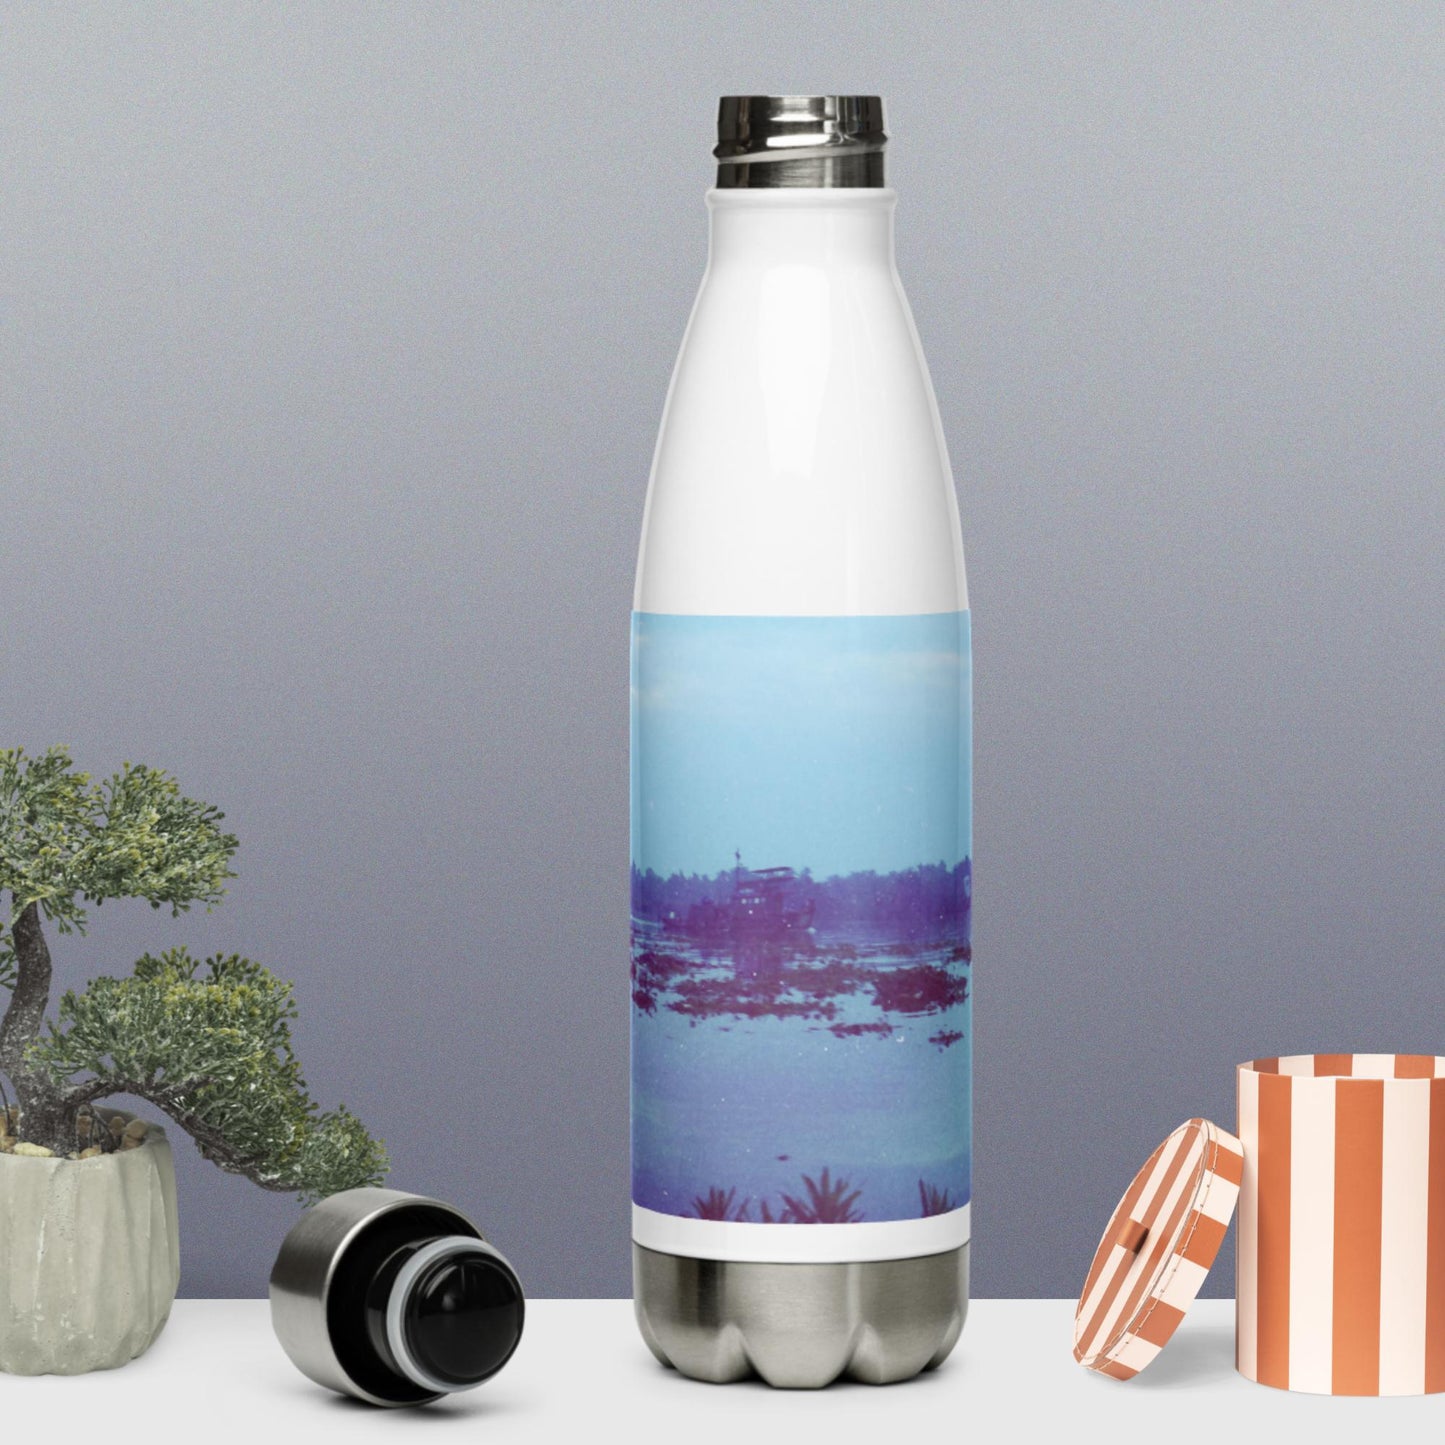 Stainless Steel Water Bottle Perpetual Melody 23/36 artist-authorised edition of original artwork by Enmempin N. Midelobo